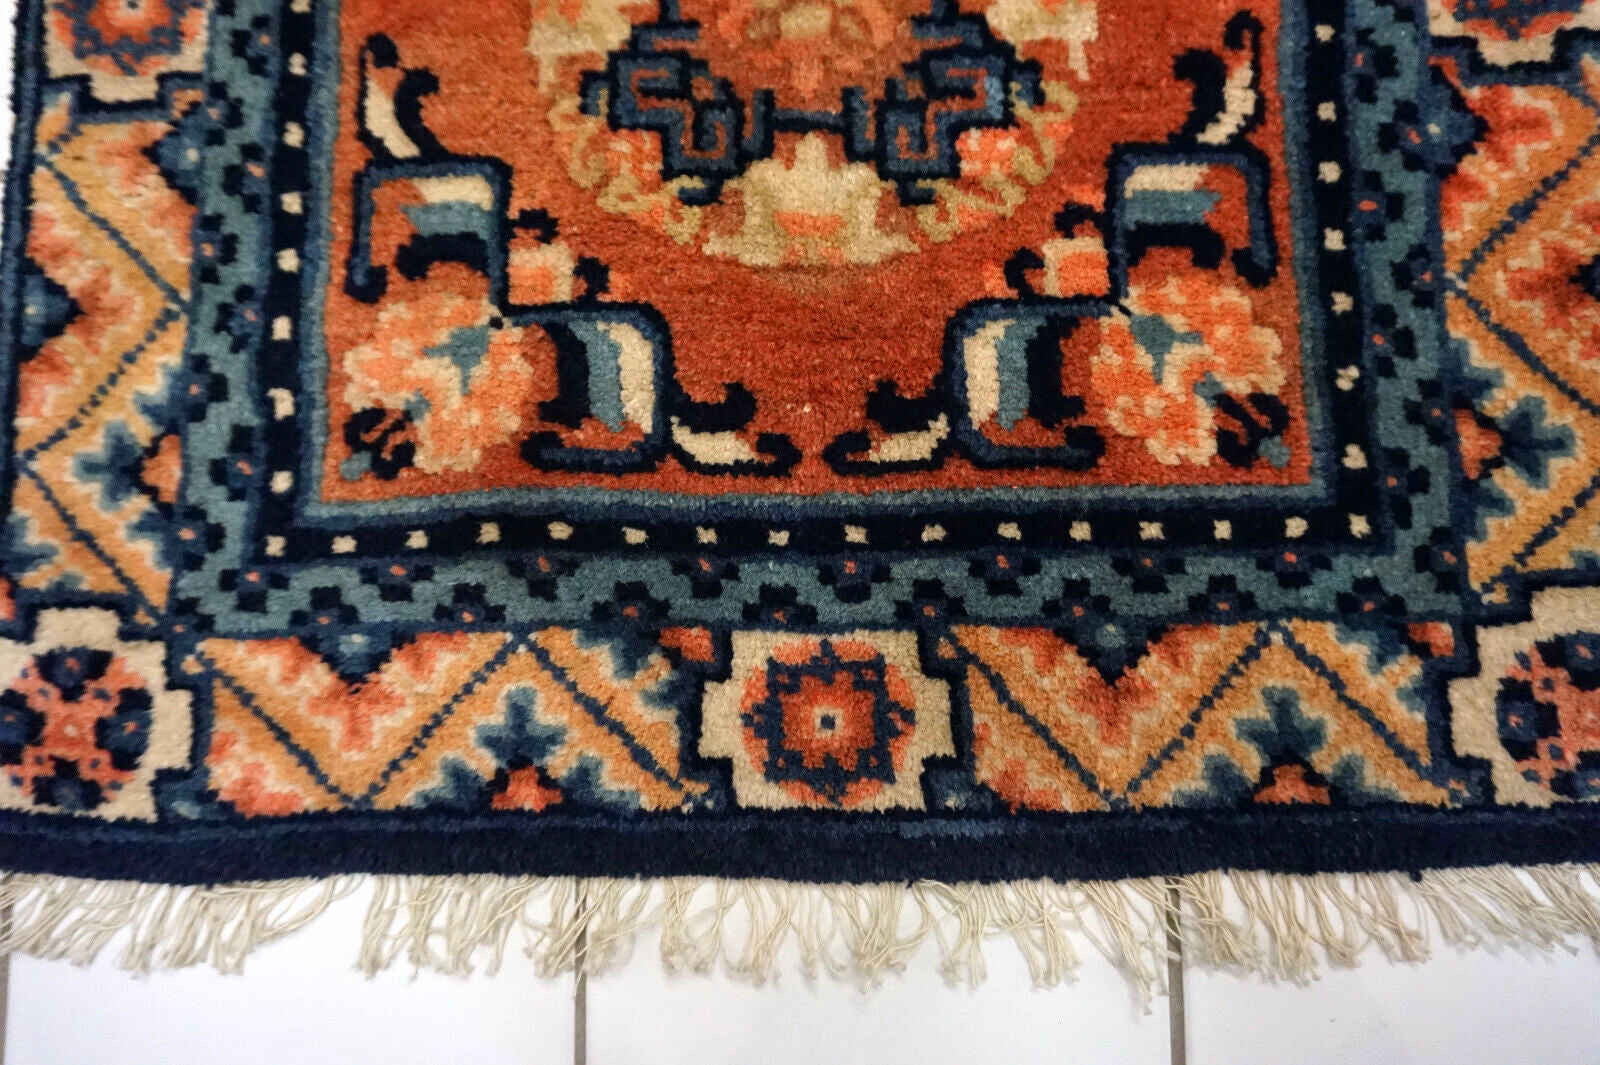 Detail of Ningsha Rug's Beige, Red, and Blue Hues - Chinese Cultural Heritage Piece